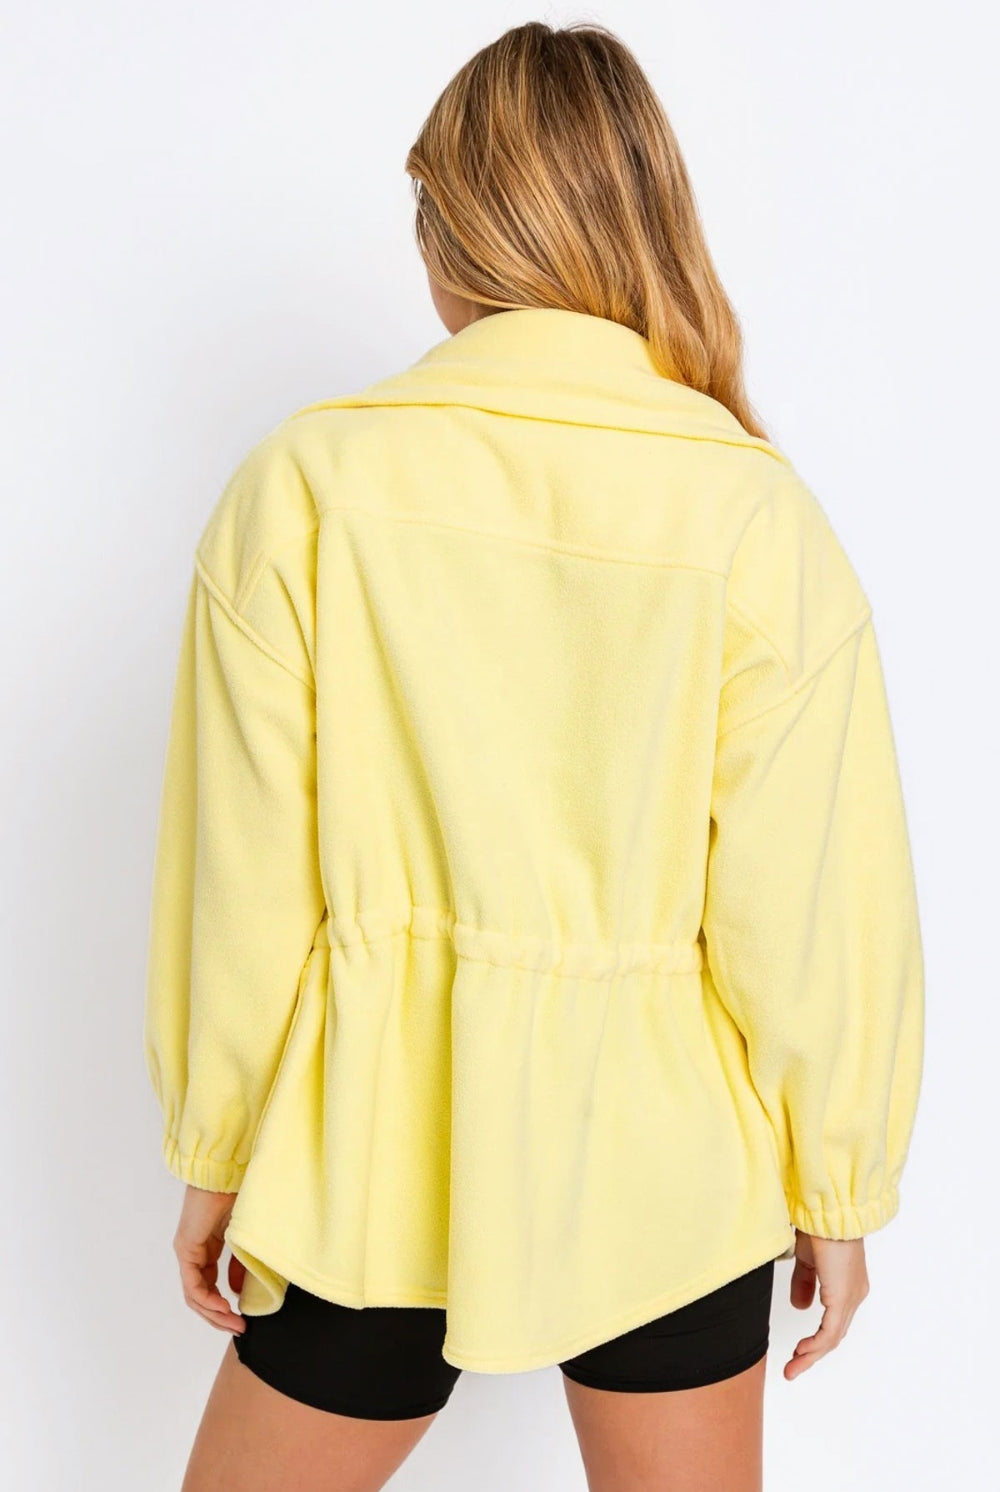 Chic young woman presenting a lemon yellow fleece jacket, ideal for adding a pop of color to a relaxed outfit.